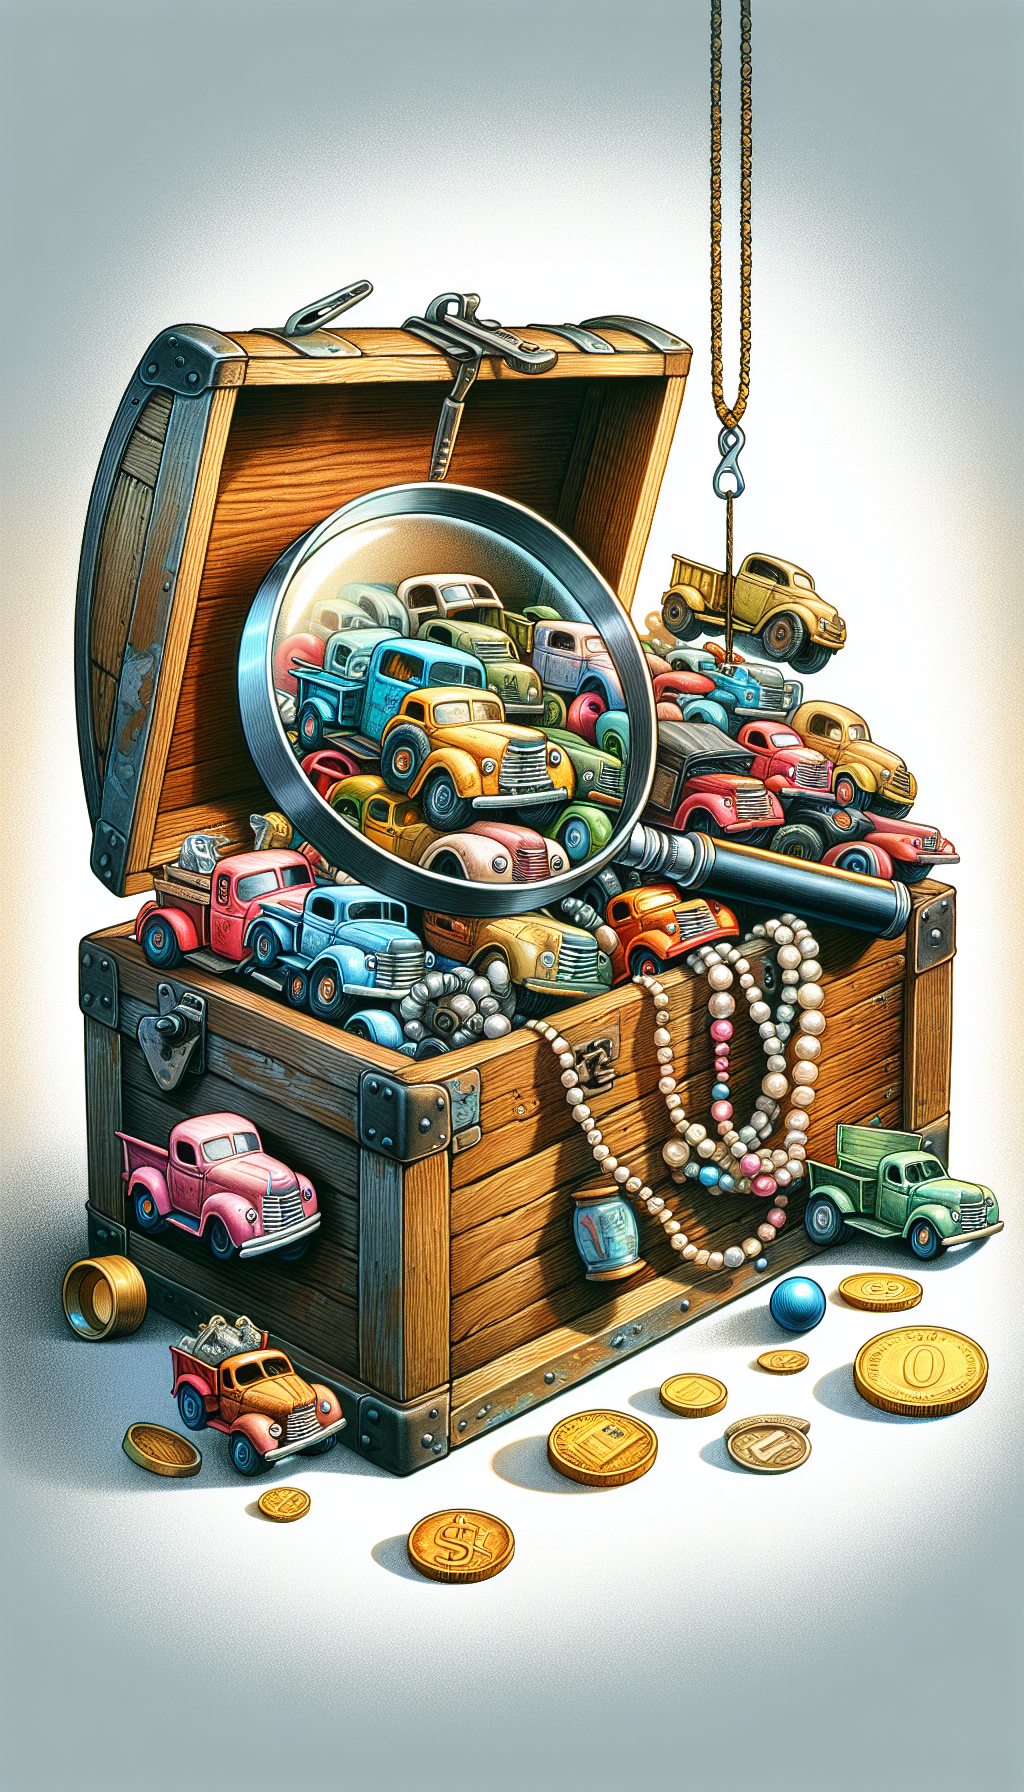 An illustration that captures a whimsical toy chest overflowing with an assortment of Tonka trucks in various states of wear, nestled among strings of pearls and gold coins, with a large, magnifying glass hovering above emphasizing details signifying rarity - like original paint and unique decals. The diverse art styles, from photorealistic to cartoonish, emphasize the varying perceptions of value among collectors.